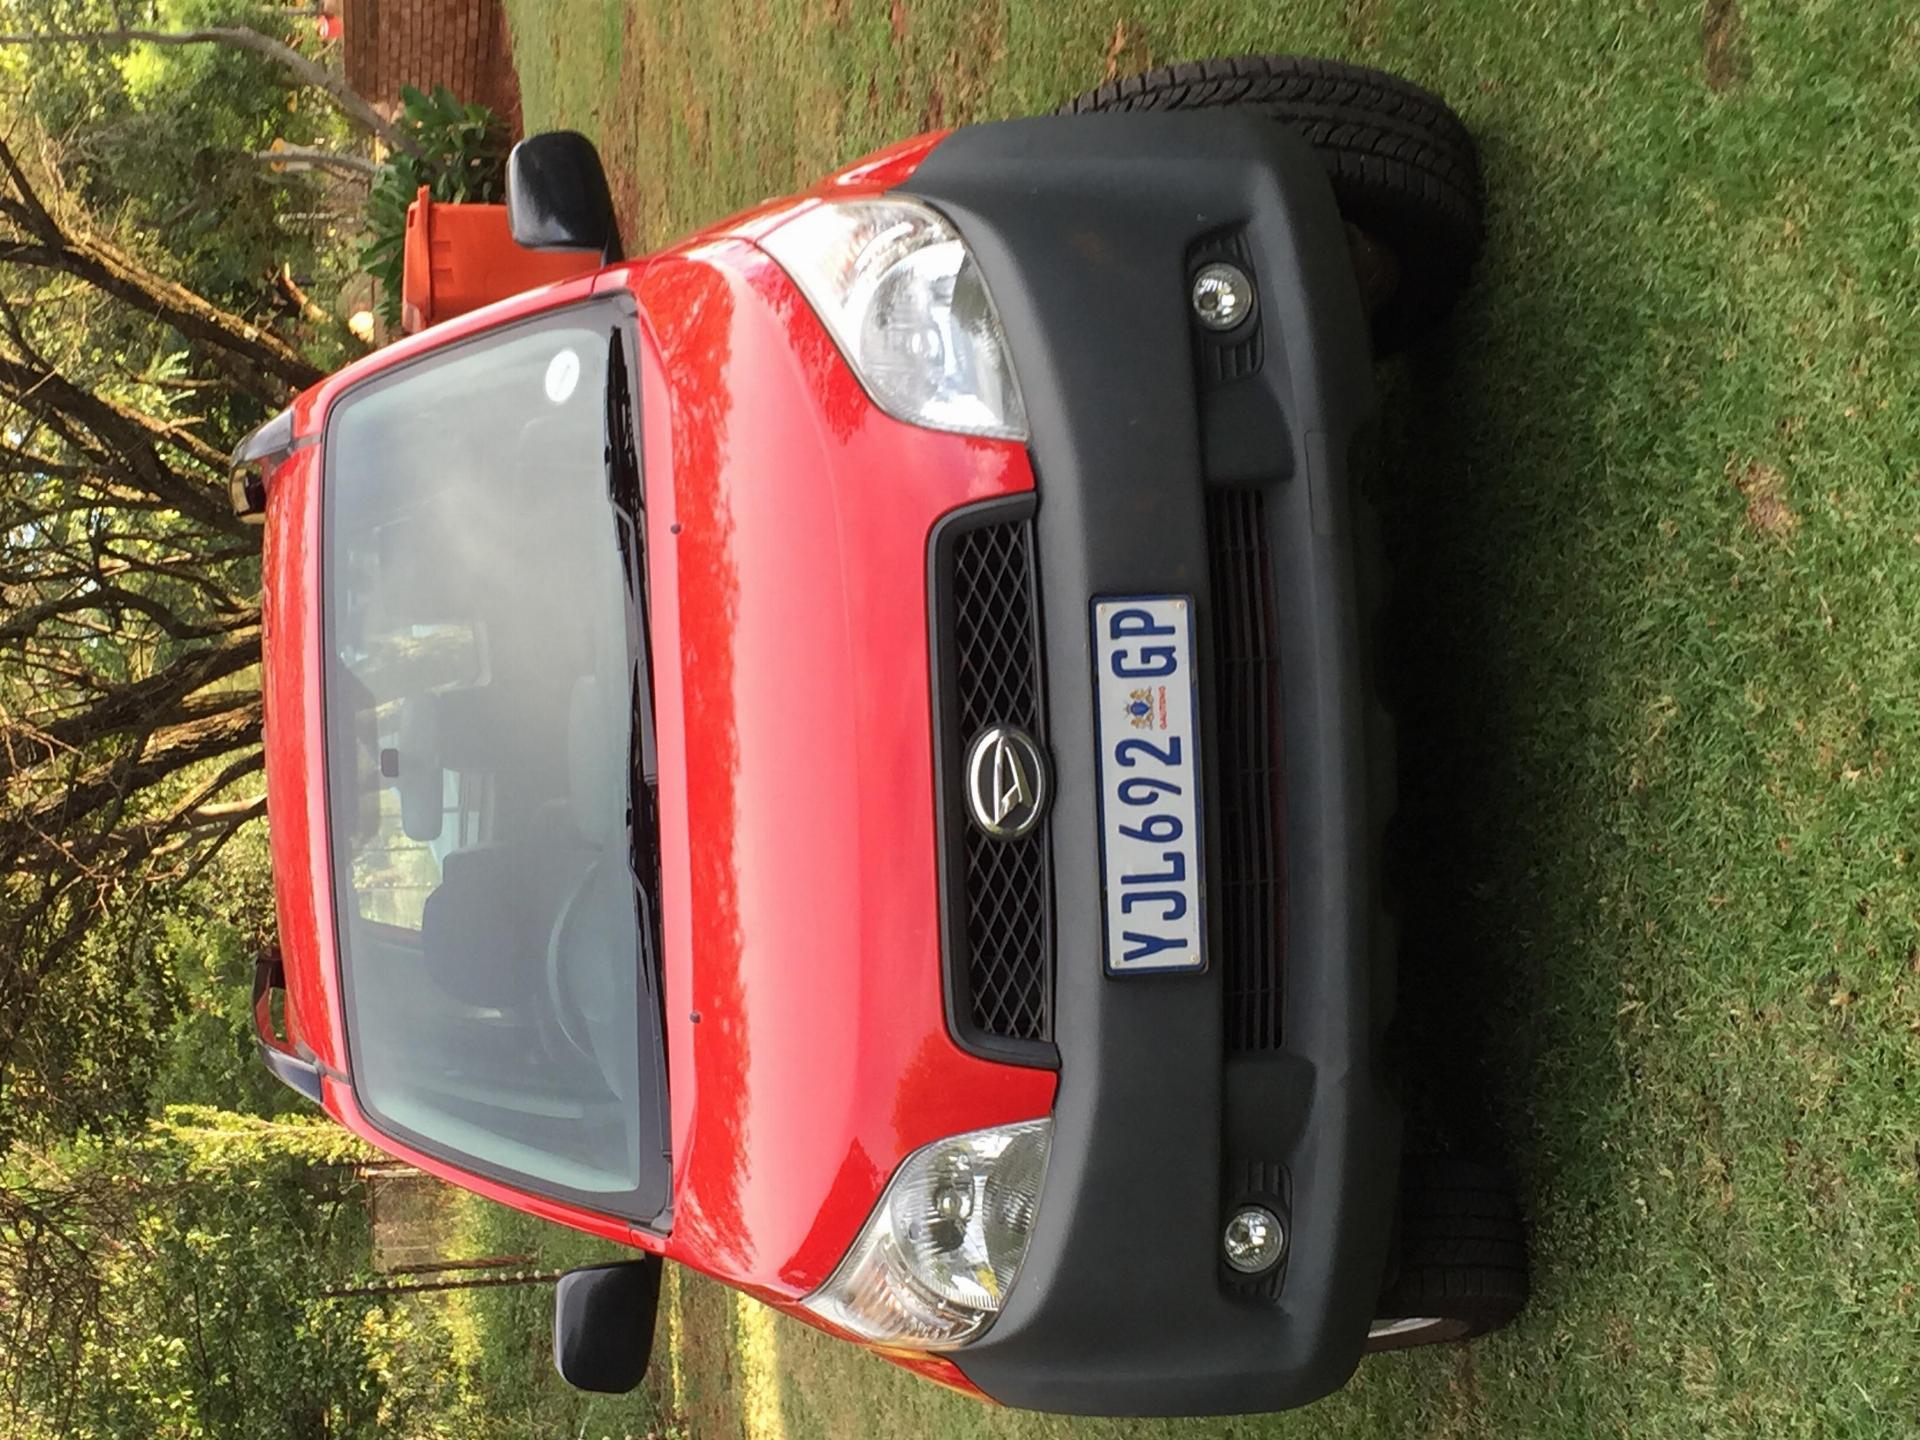 Daihatsu Red Terios For Sale What AN Awesome DRIVE!